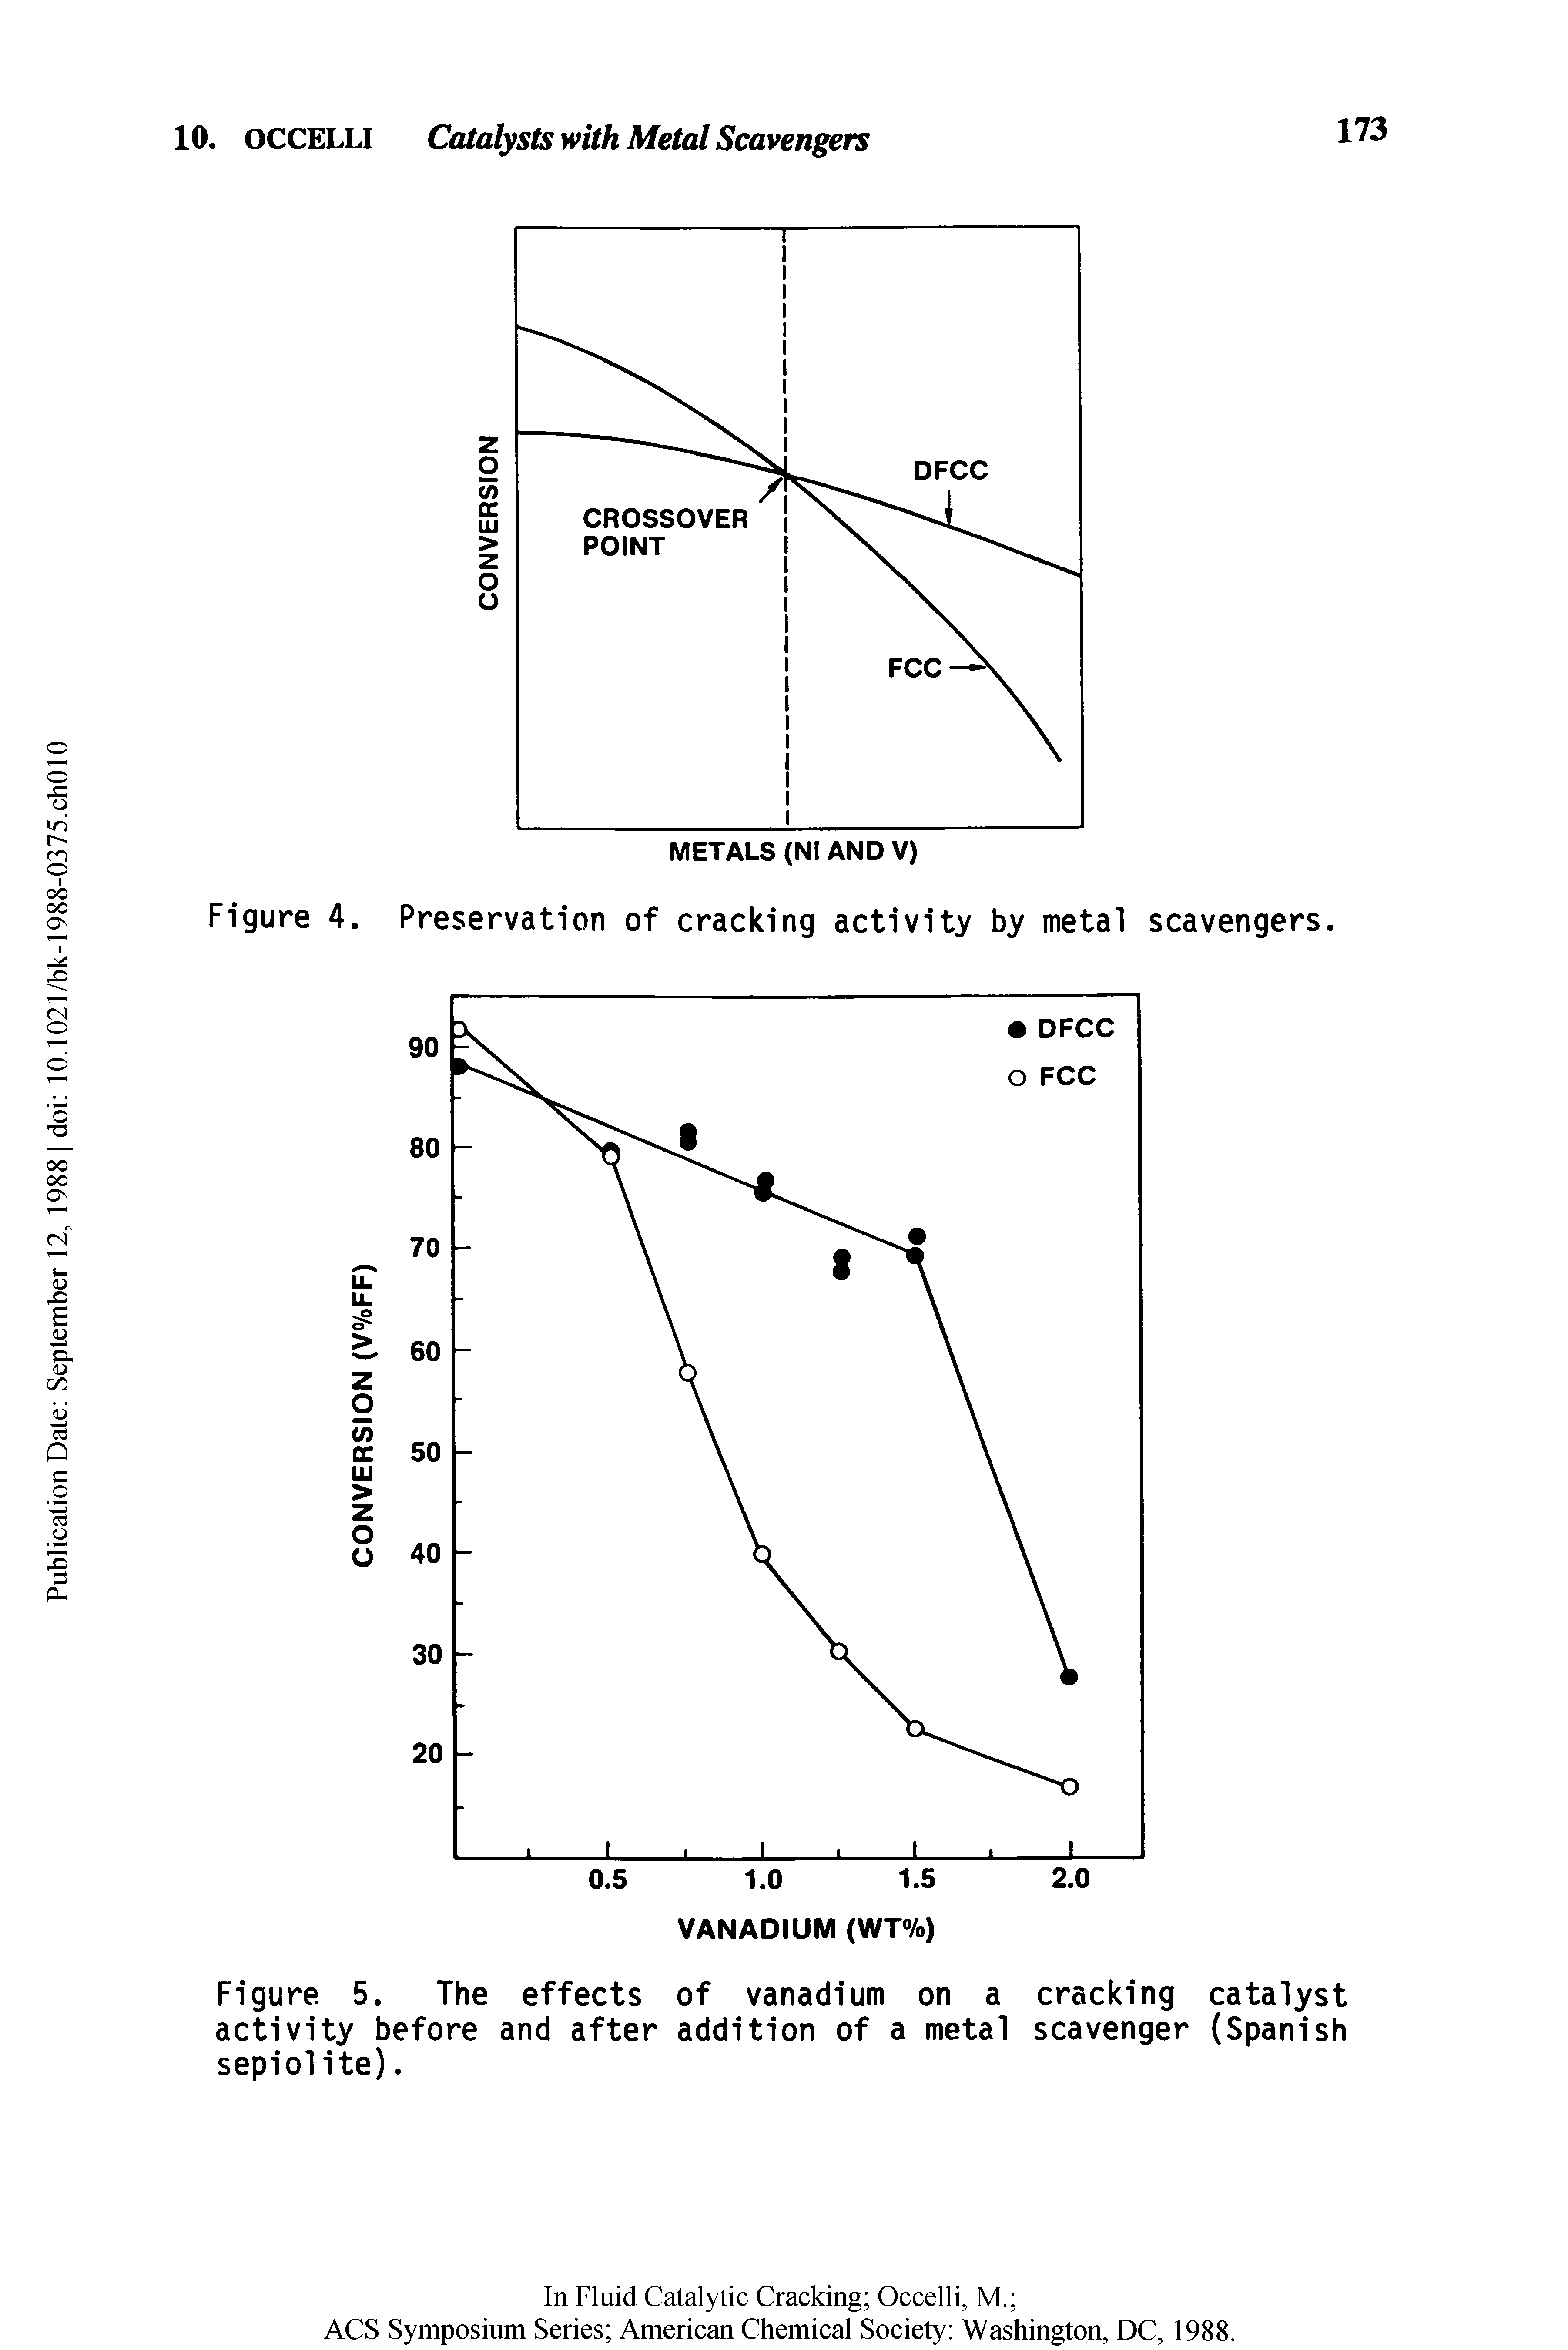 Figure 5. The effects of vanadium on a cracking catalyst activity before and after addition of a metal scavenger (Spanish sepiolite).